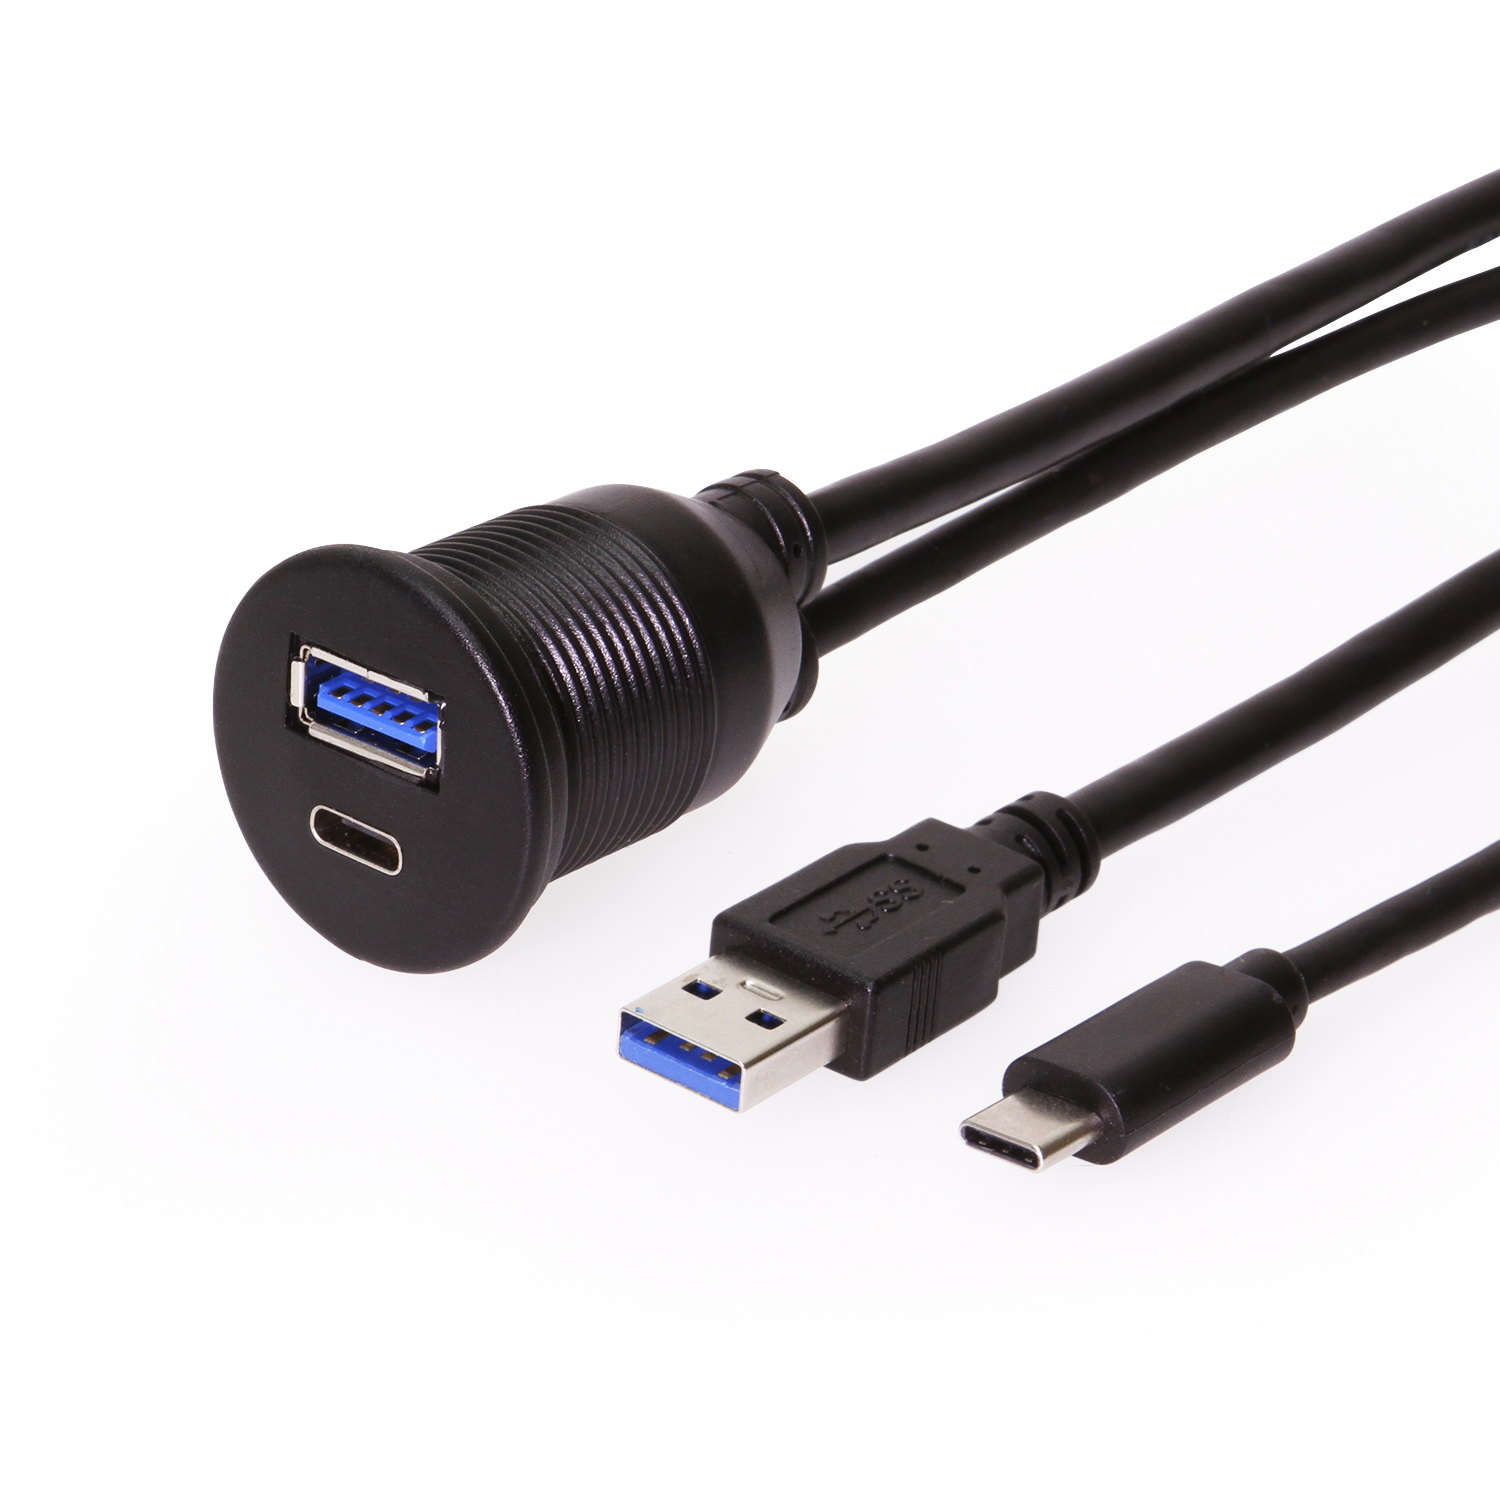 USB Extension Cables for Longer Distance Connections - Coolgear